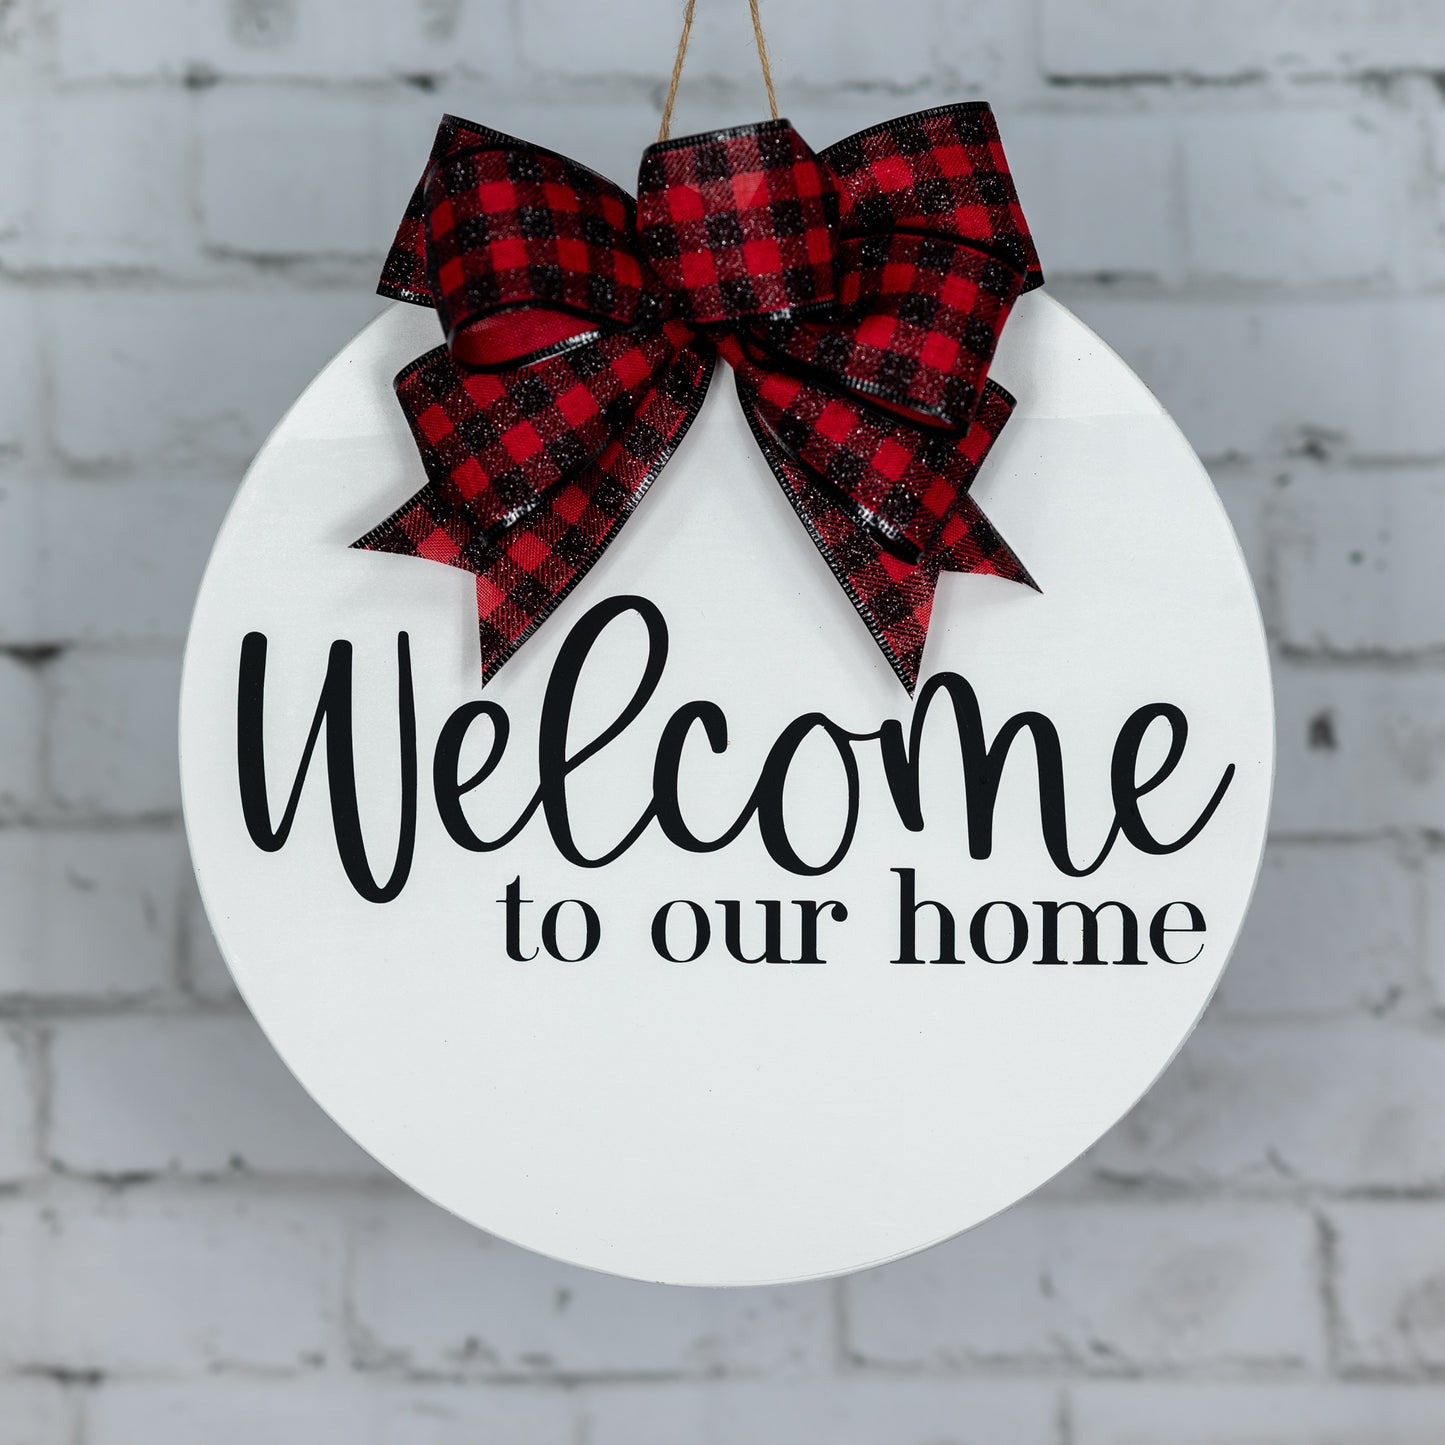 welcome to our home ~ round door sign